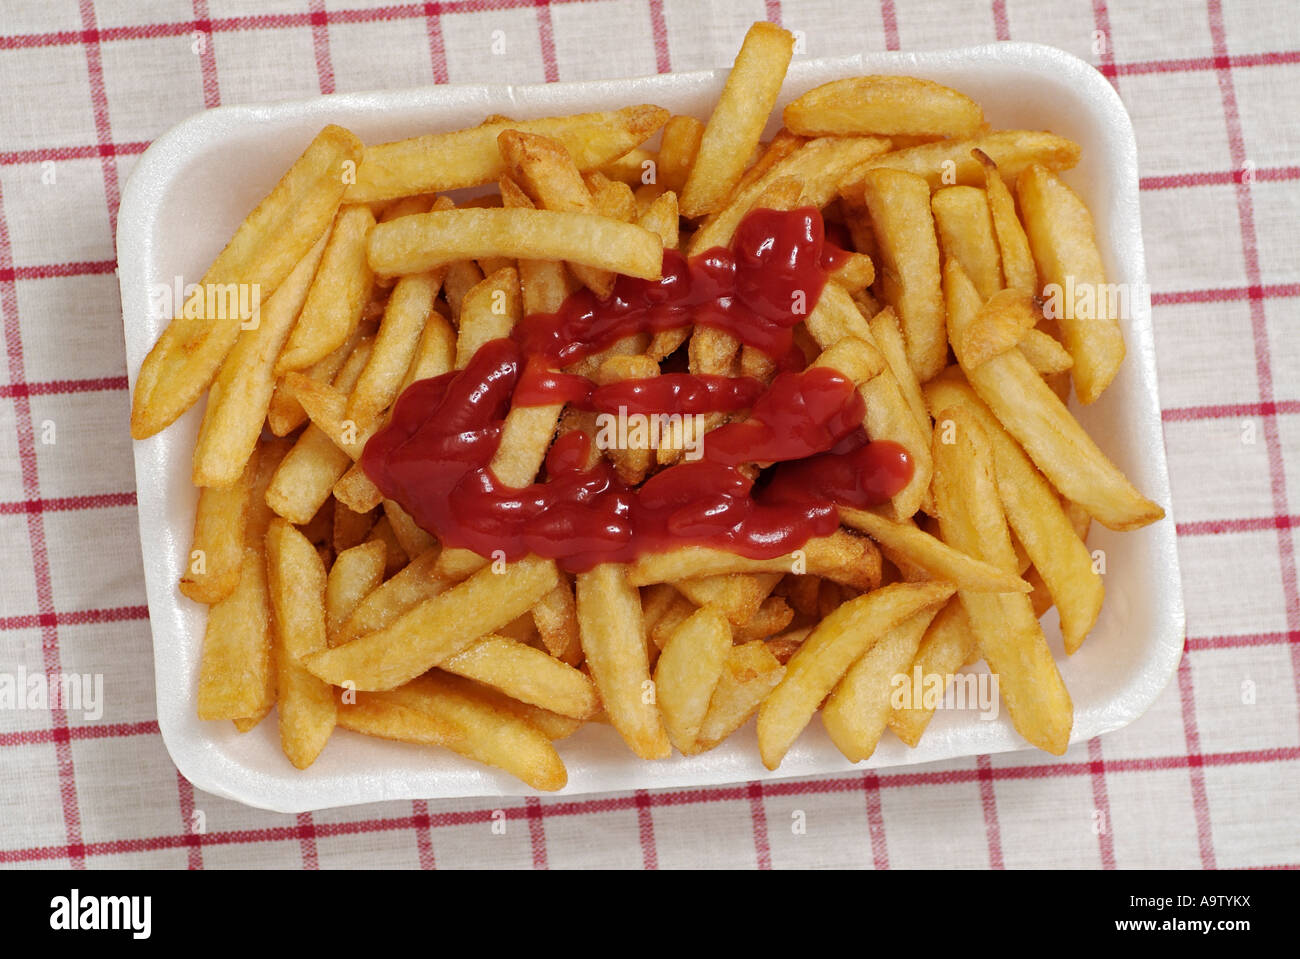 Portion of Chips with Ketchup Stock Photo